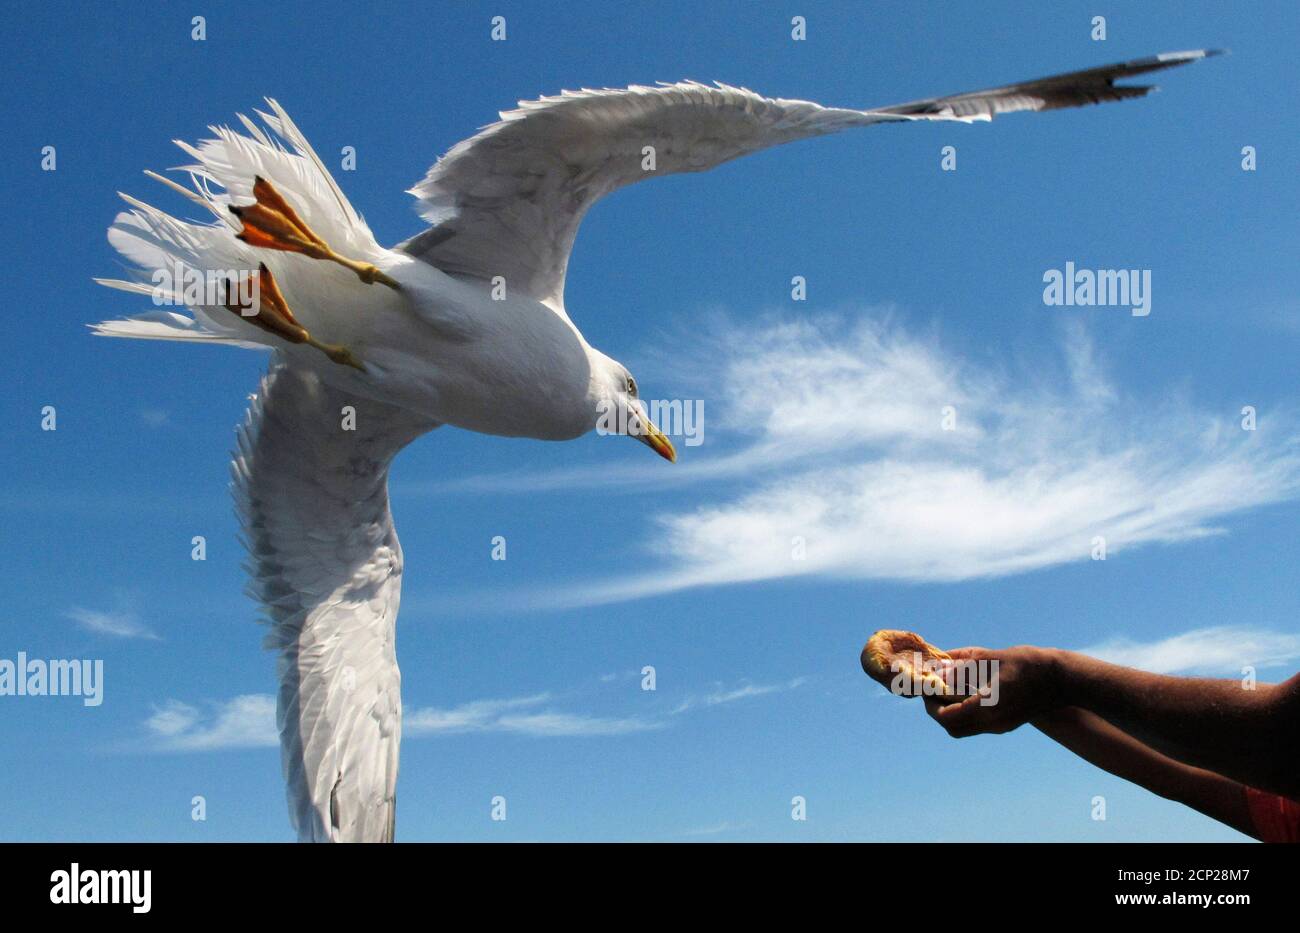 A man gives food to a seagull at the beach in the Italian town of Stintino, northwest of Sardinia, August 9, 2010. Picture taken August 9. REUTERS/Alessandro Bianchi (ITALY - Tags: SOCIETY TRAVEL IMAGES OF THE DAY) Stock Photo